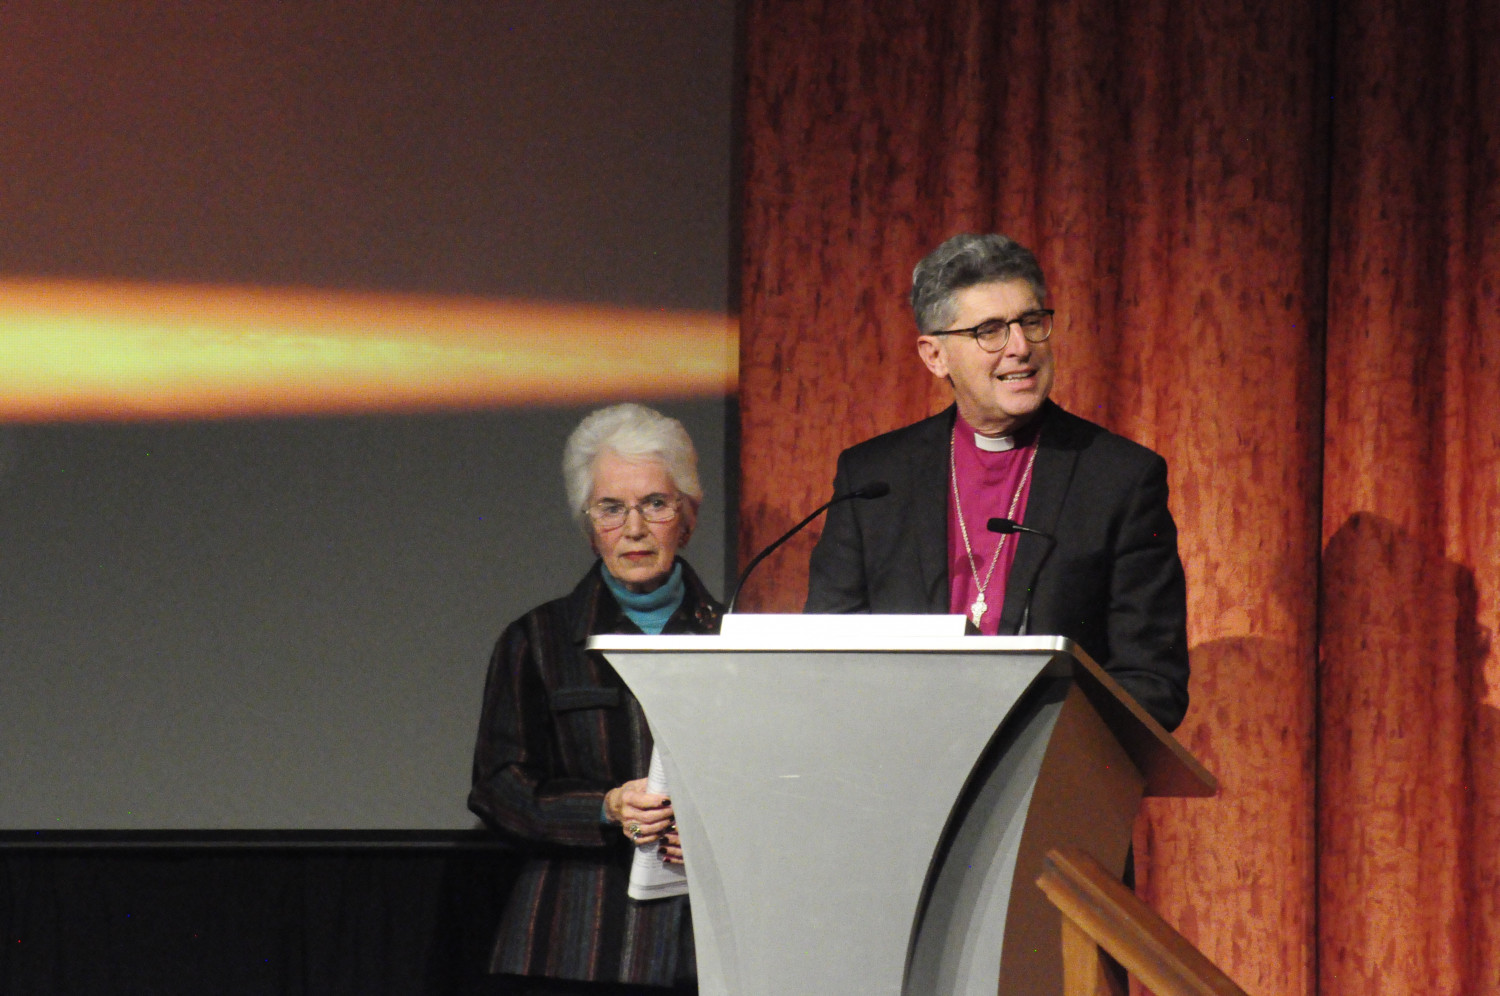 Bishop Martin speaking at the event